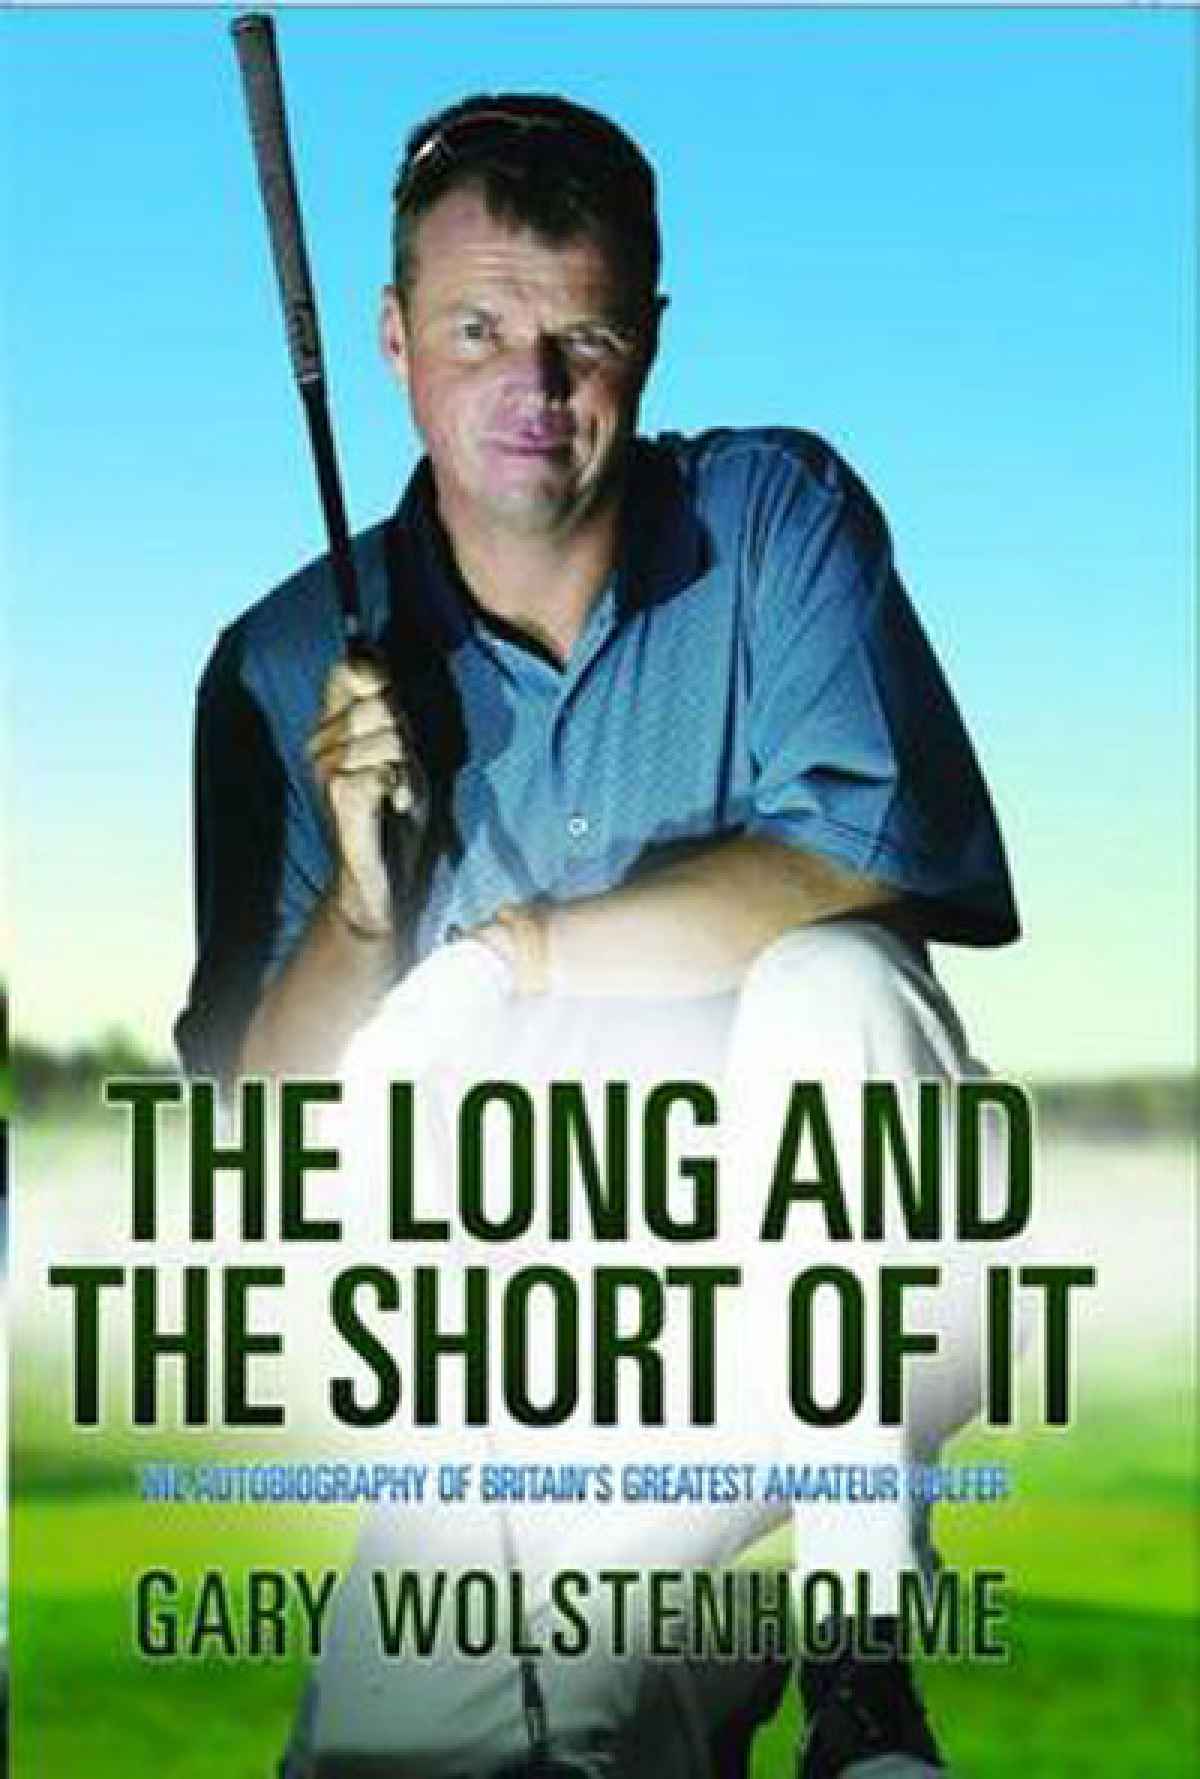 'The Long and the short of it'- autobiography by Gary Wolstenholme